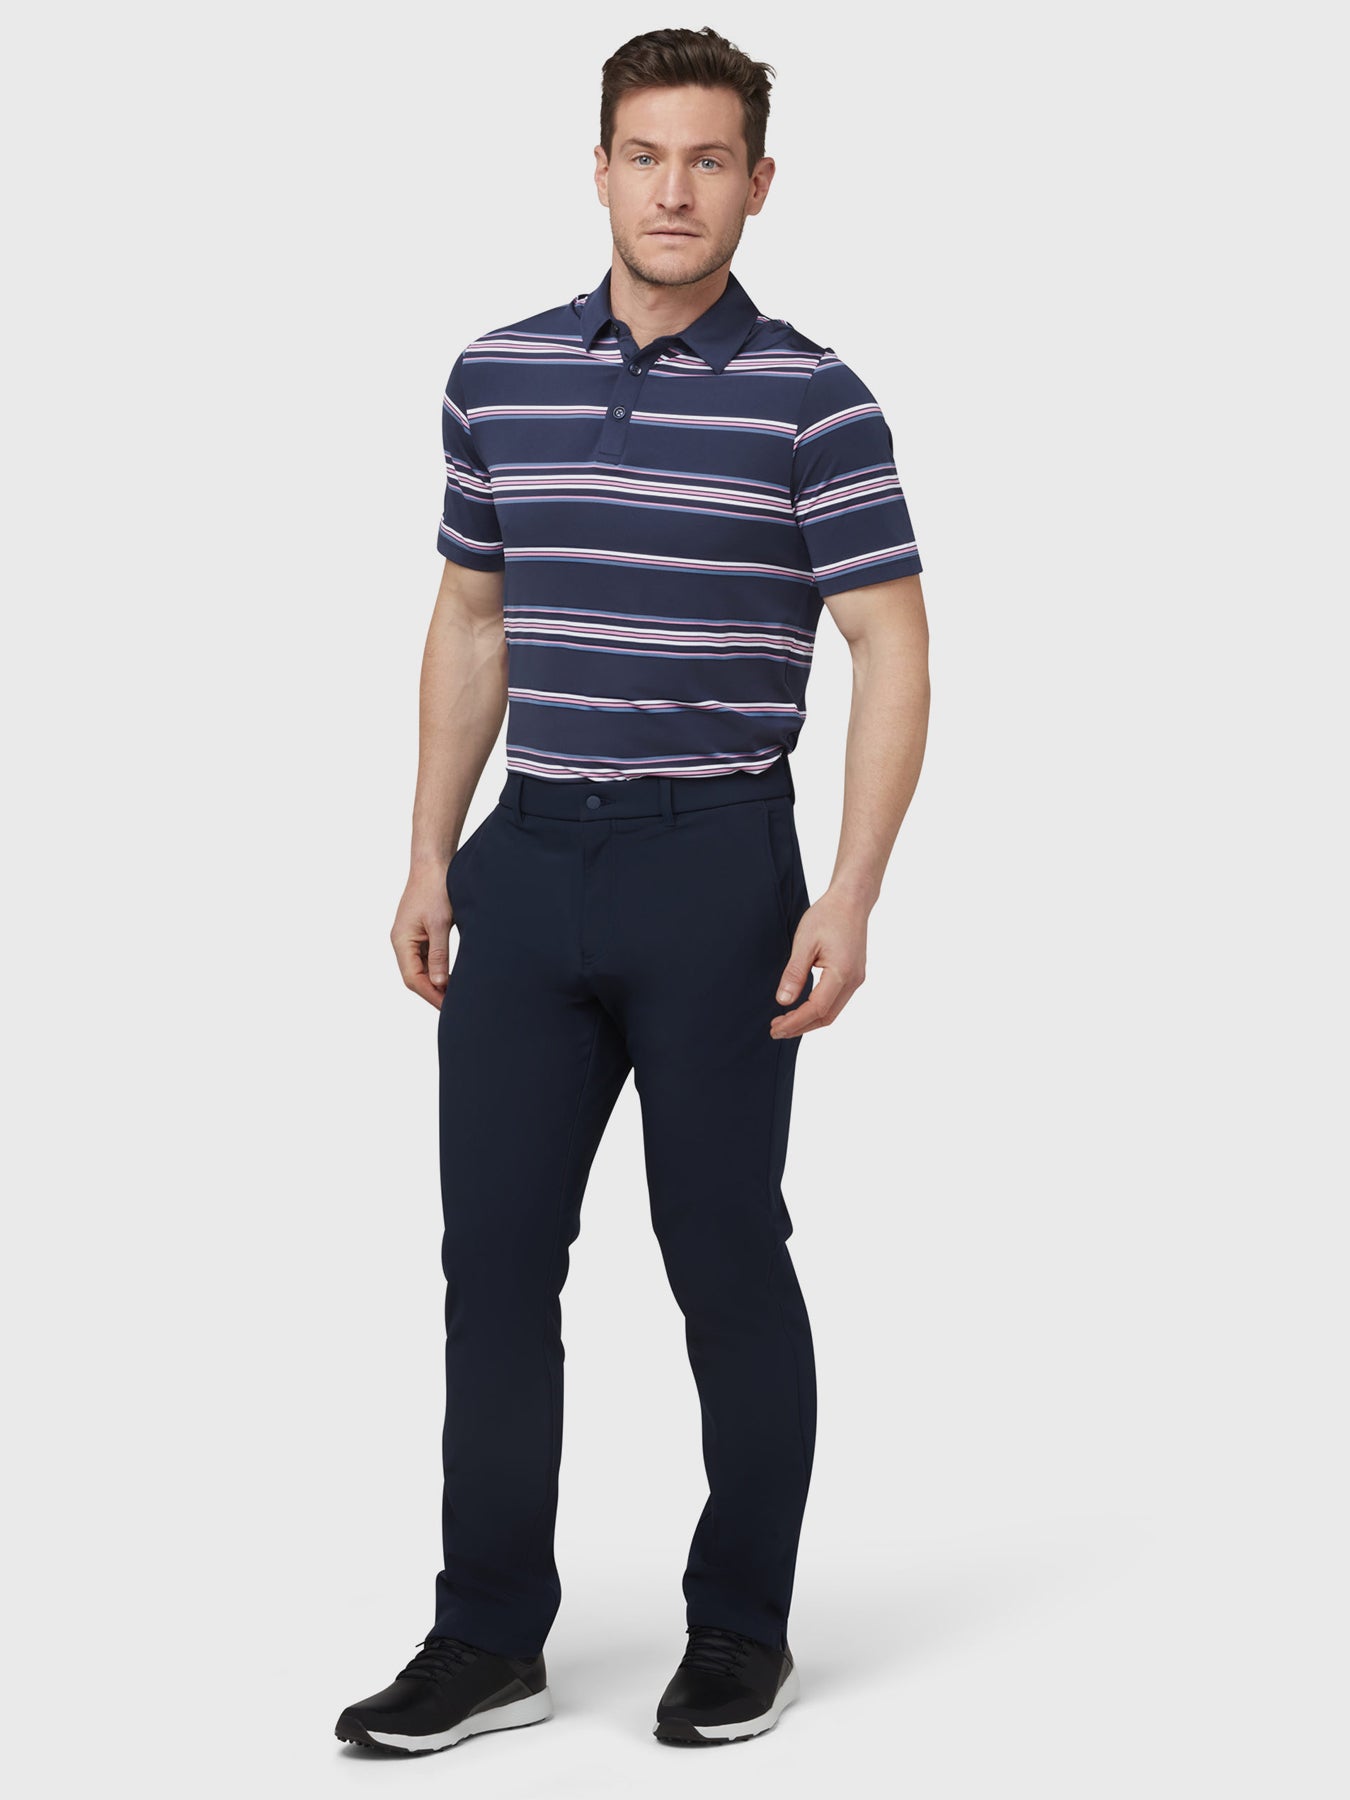 View Resort Ventilated Stripe Golf Polo In Peacoat Peacoat S information